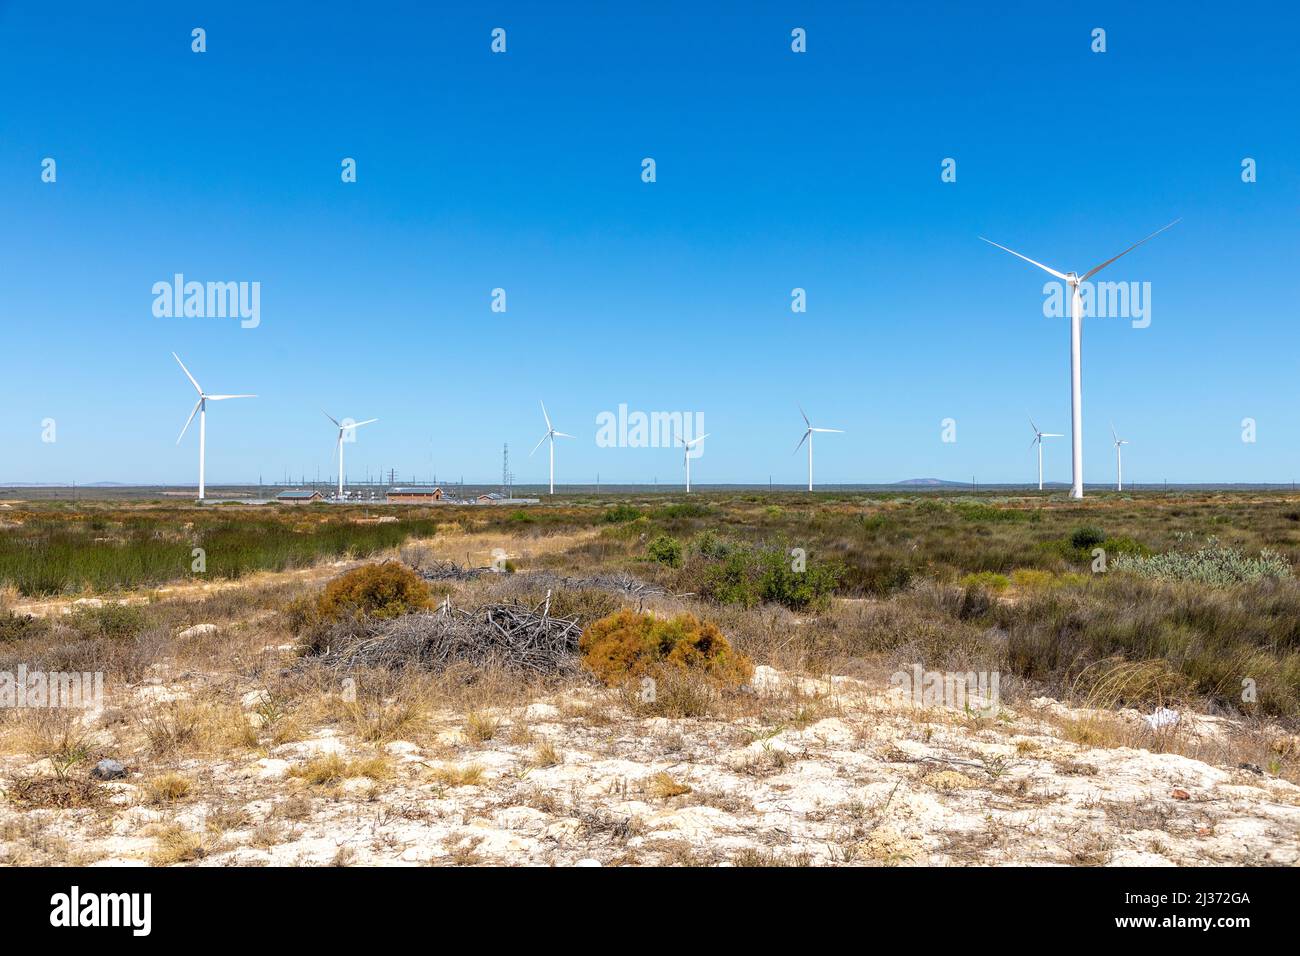 Selective focus on a semi arid desert area, in the background is wind turbines and a clear blue sky. Stock Photo